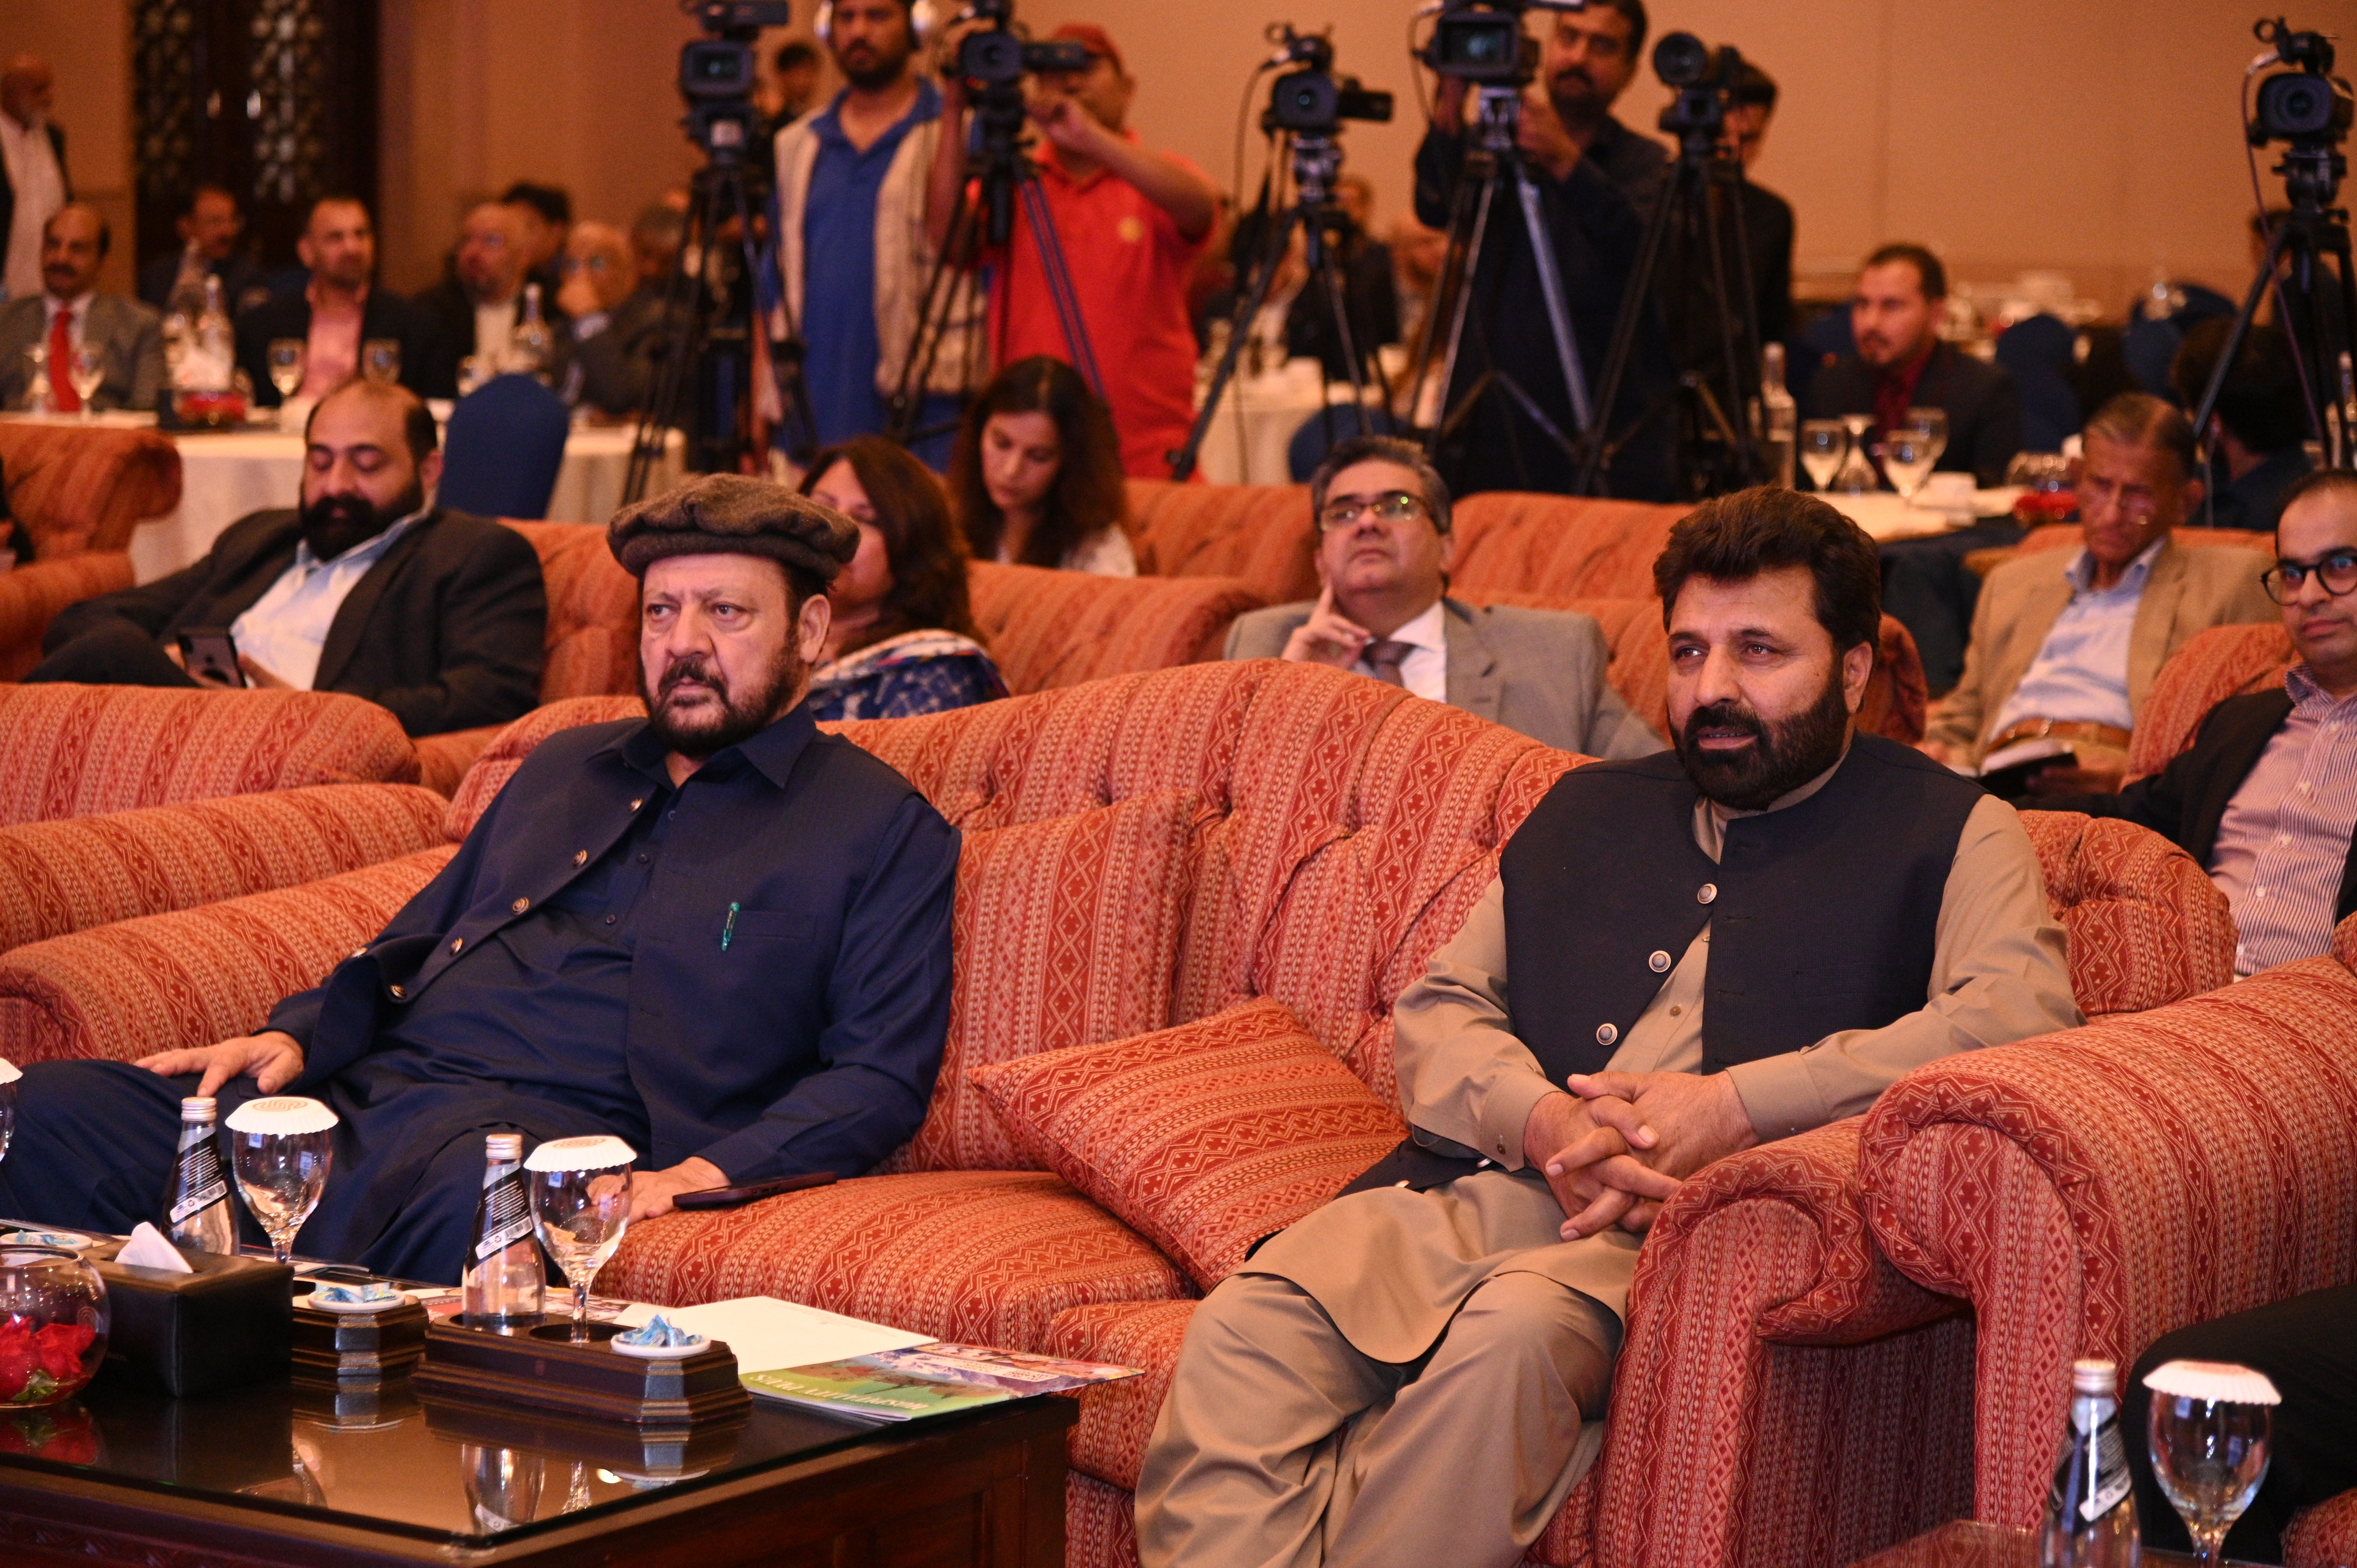 Members of Gilgit Baltistan government attending the event